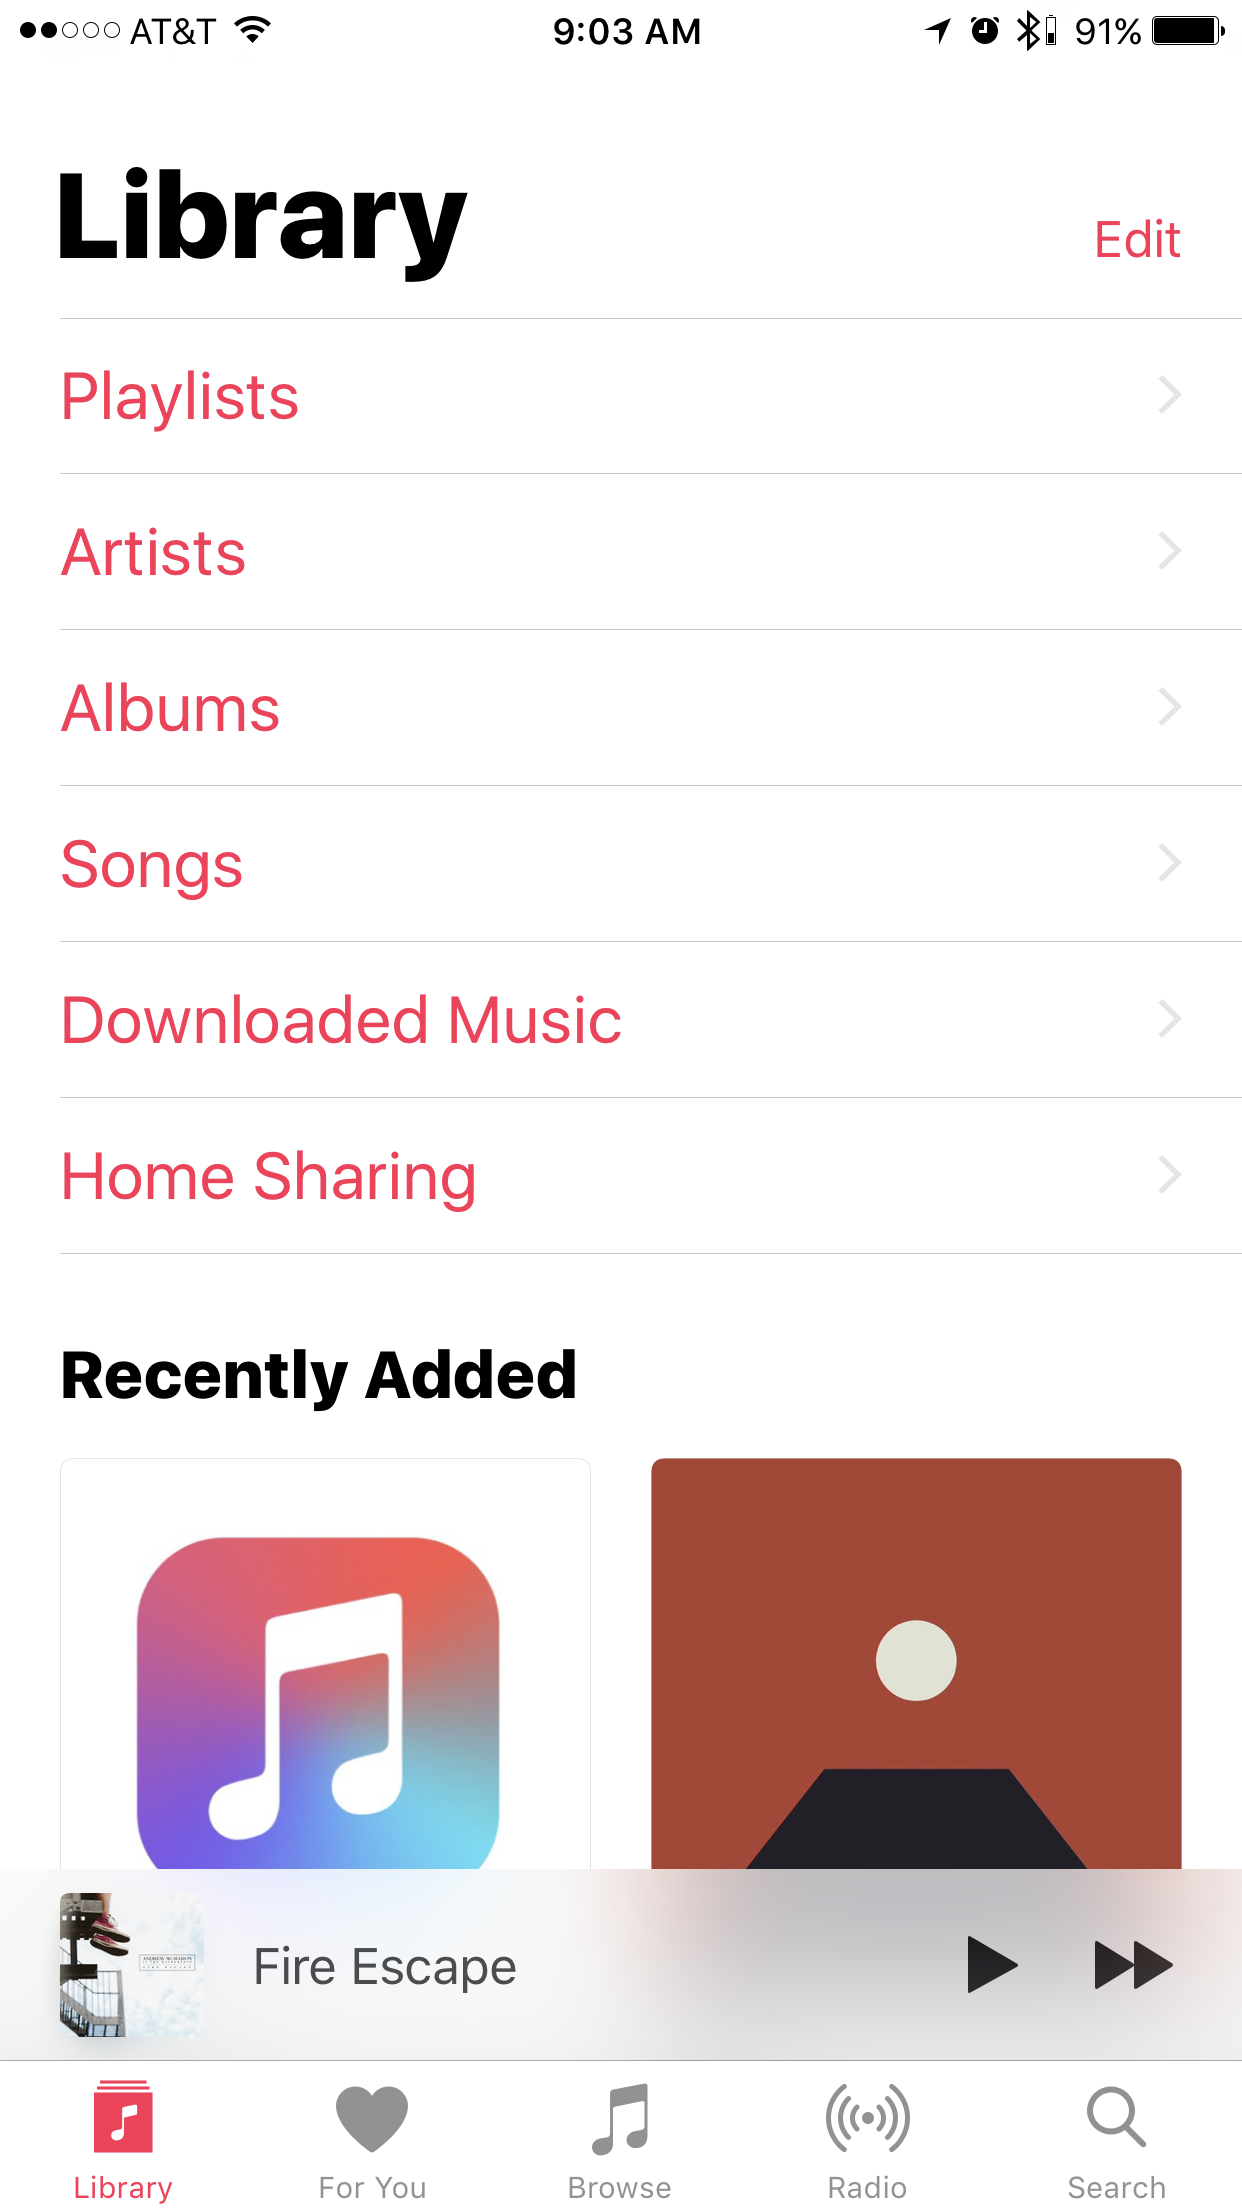 download music to iphone